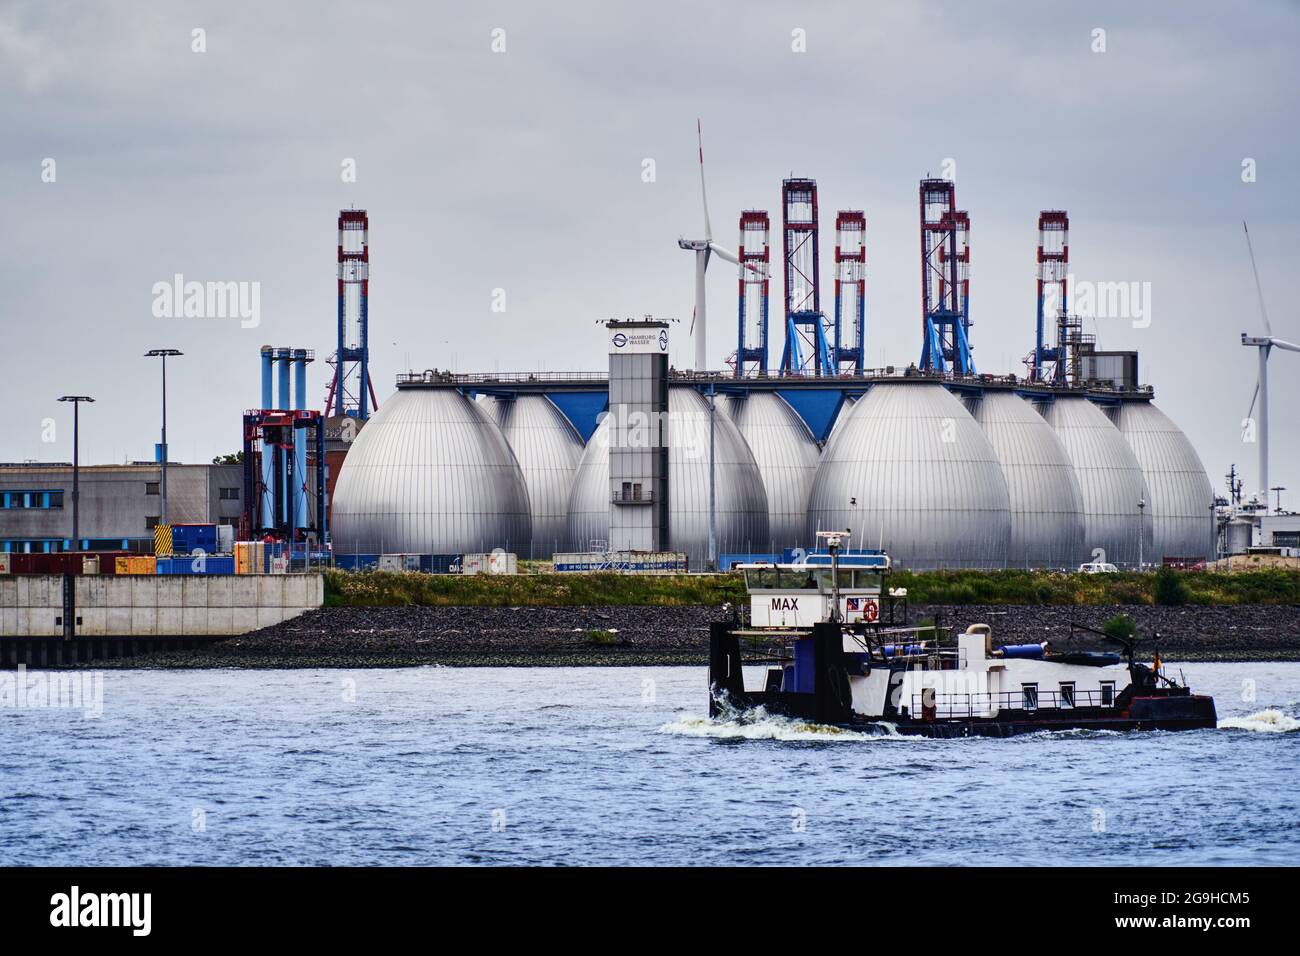 Hamburg, Germany, July 22, 2021: Digesters of a sewage treatment plant of the Hamburg waterworks on the Elbe with a ferry in the foreground on the riv Stock Photo